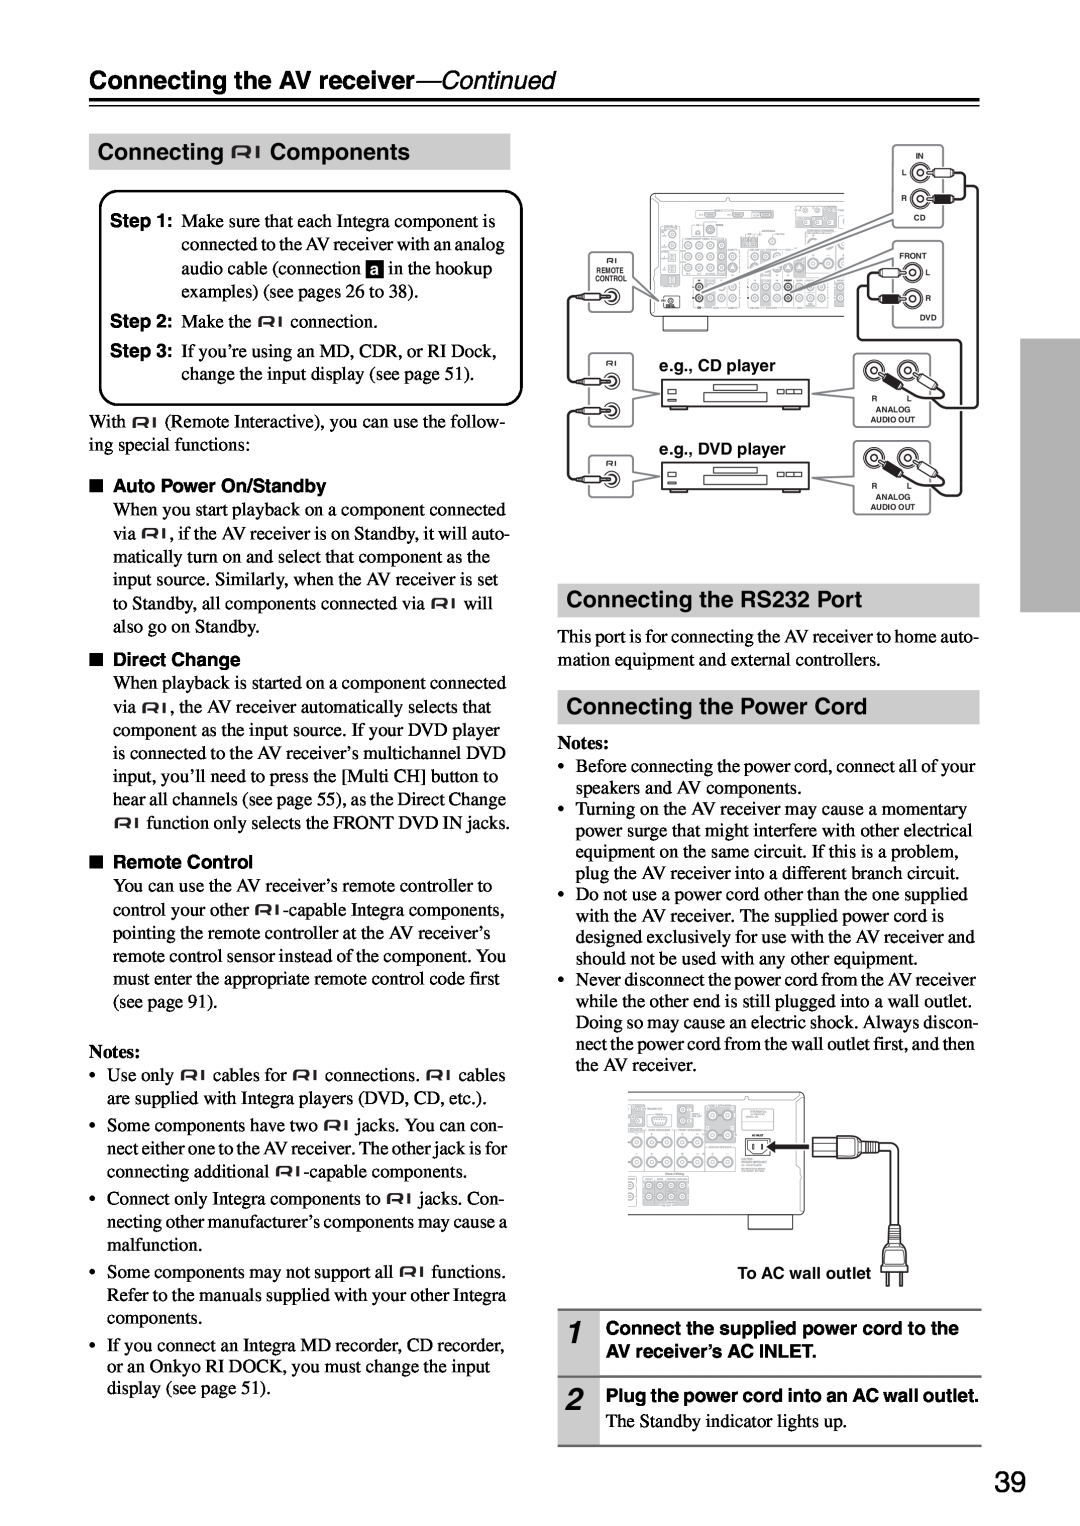 Integra DTR-5.8 instruction manual Connecting Components, Connecting the RS232 Port, Connecting the Power Cord, Notes 